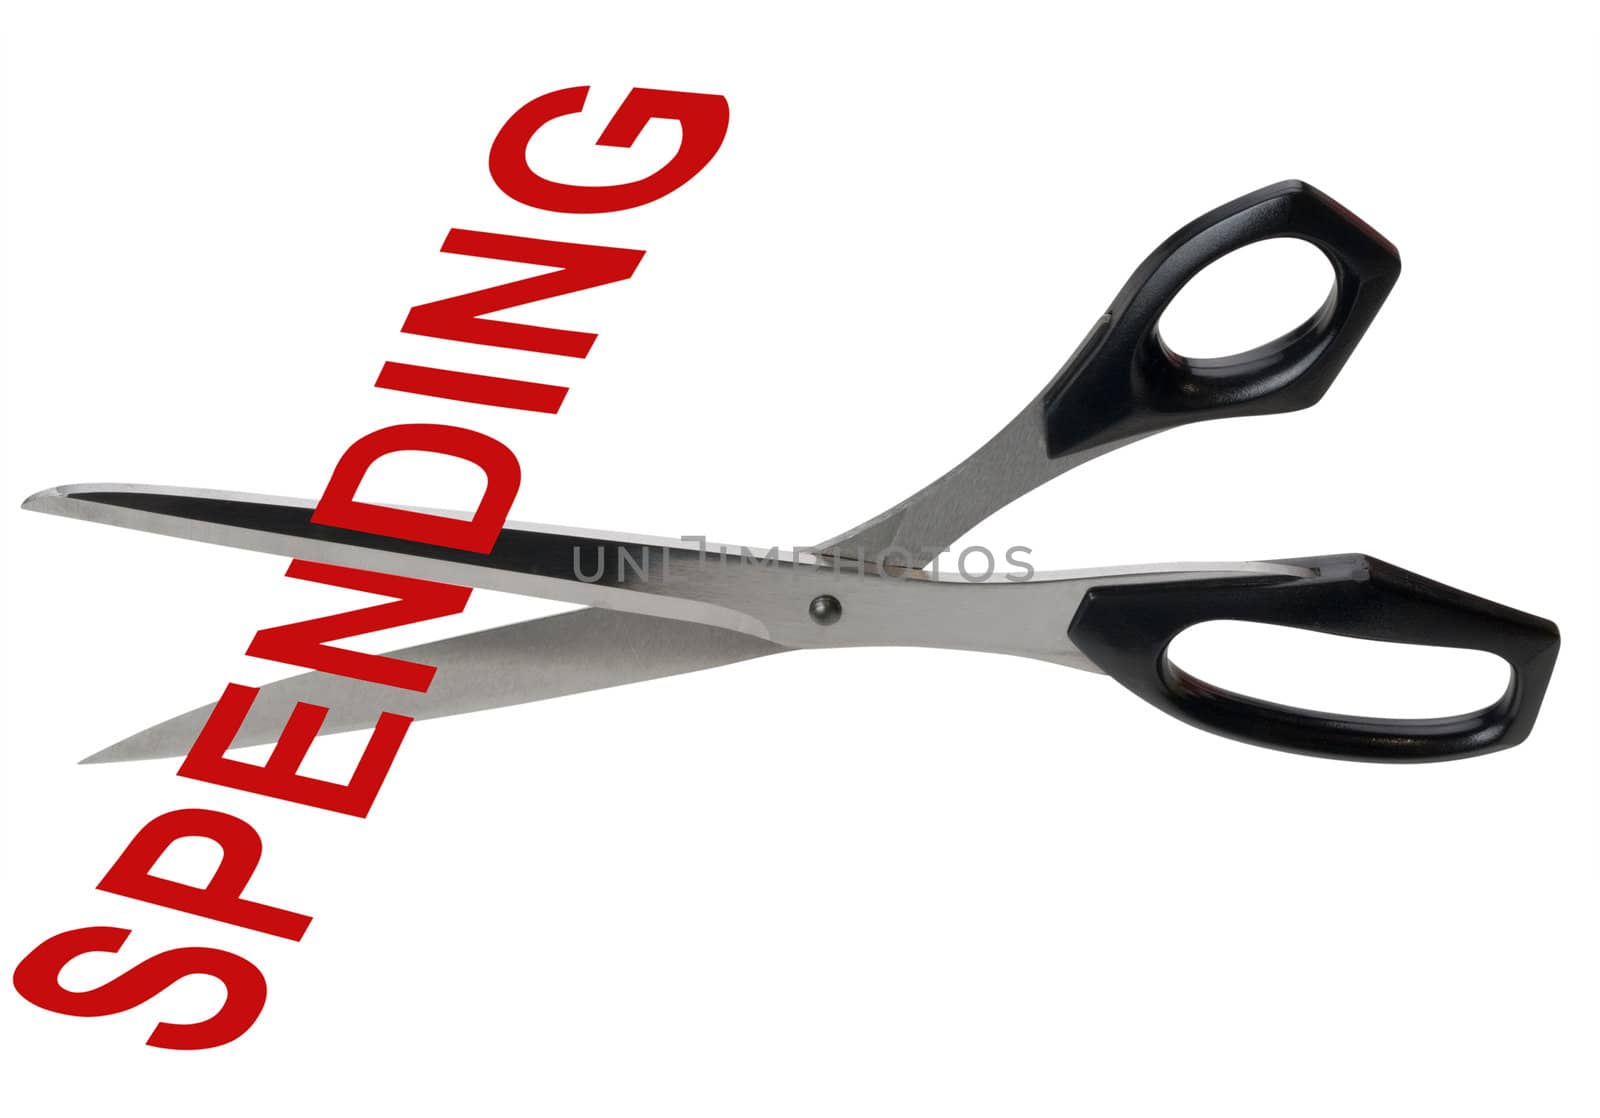 Scissors cutting the word spending as a metaphor,isolated with clipping path